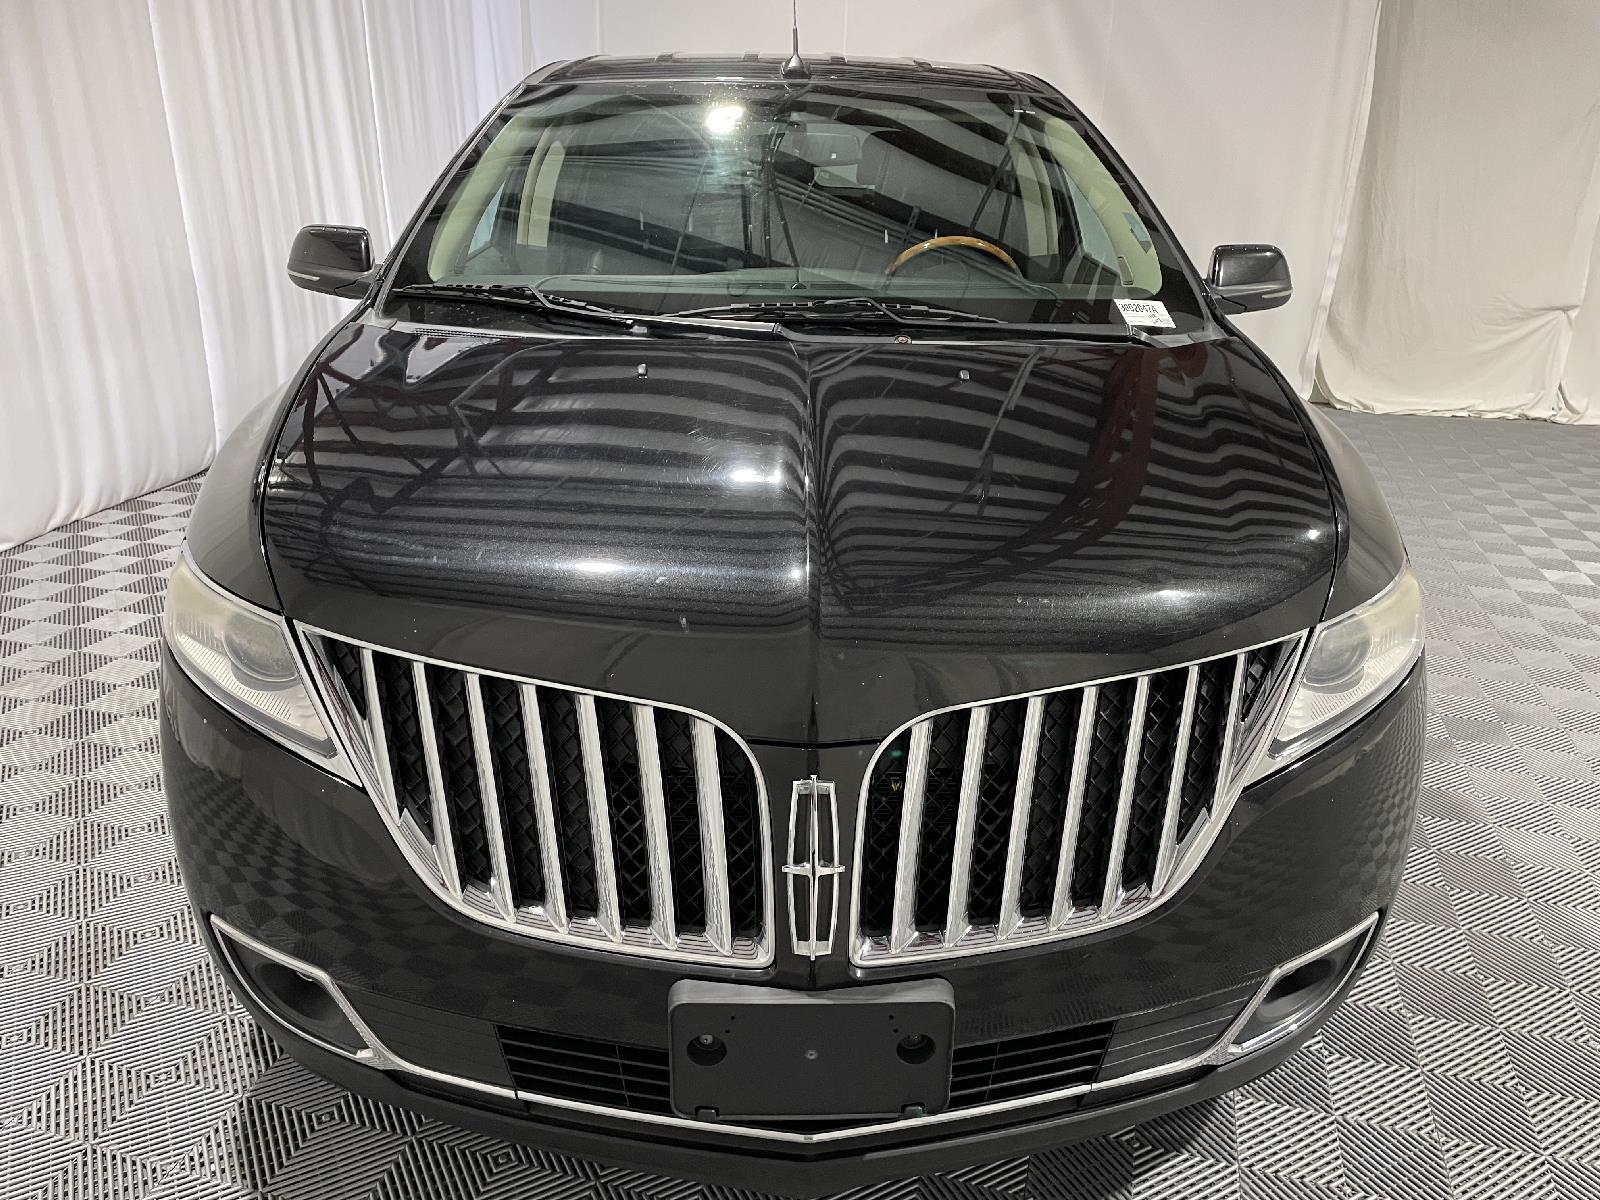 Used 2013 Lincoln MKX  crossover for sale in St Joseph MO